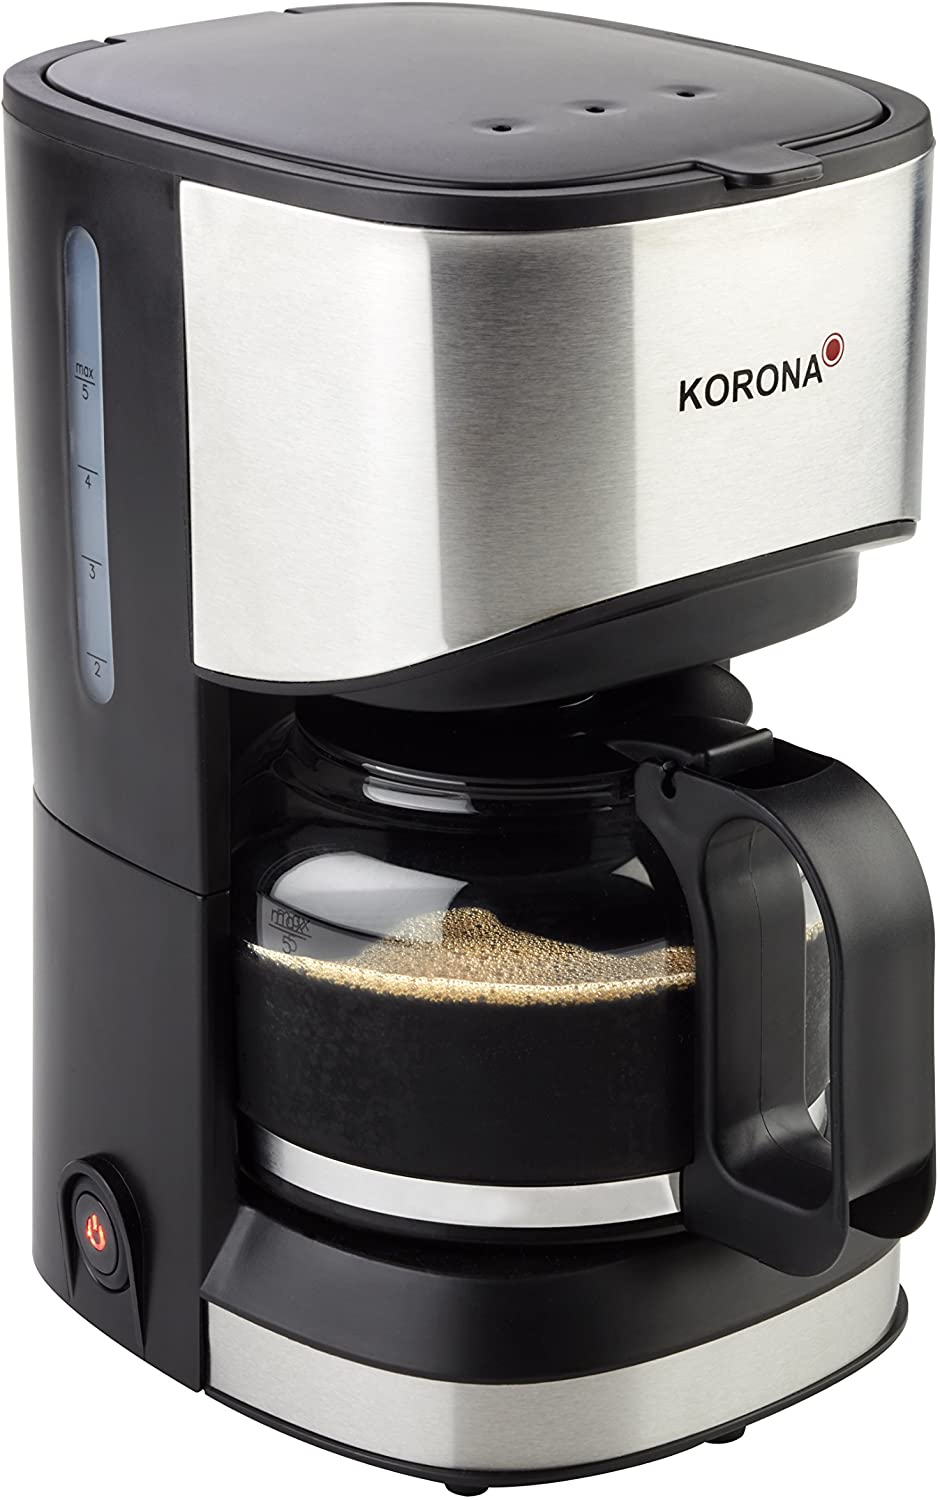 Korona 12015 Stainless Steel Coffee Machine in Black - Filter Coffee Machine for 5 Cups of Coffee with a Glass Jug